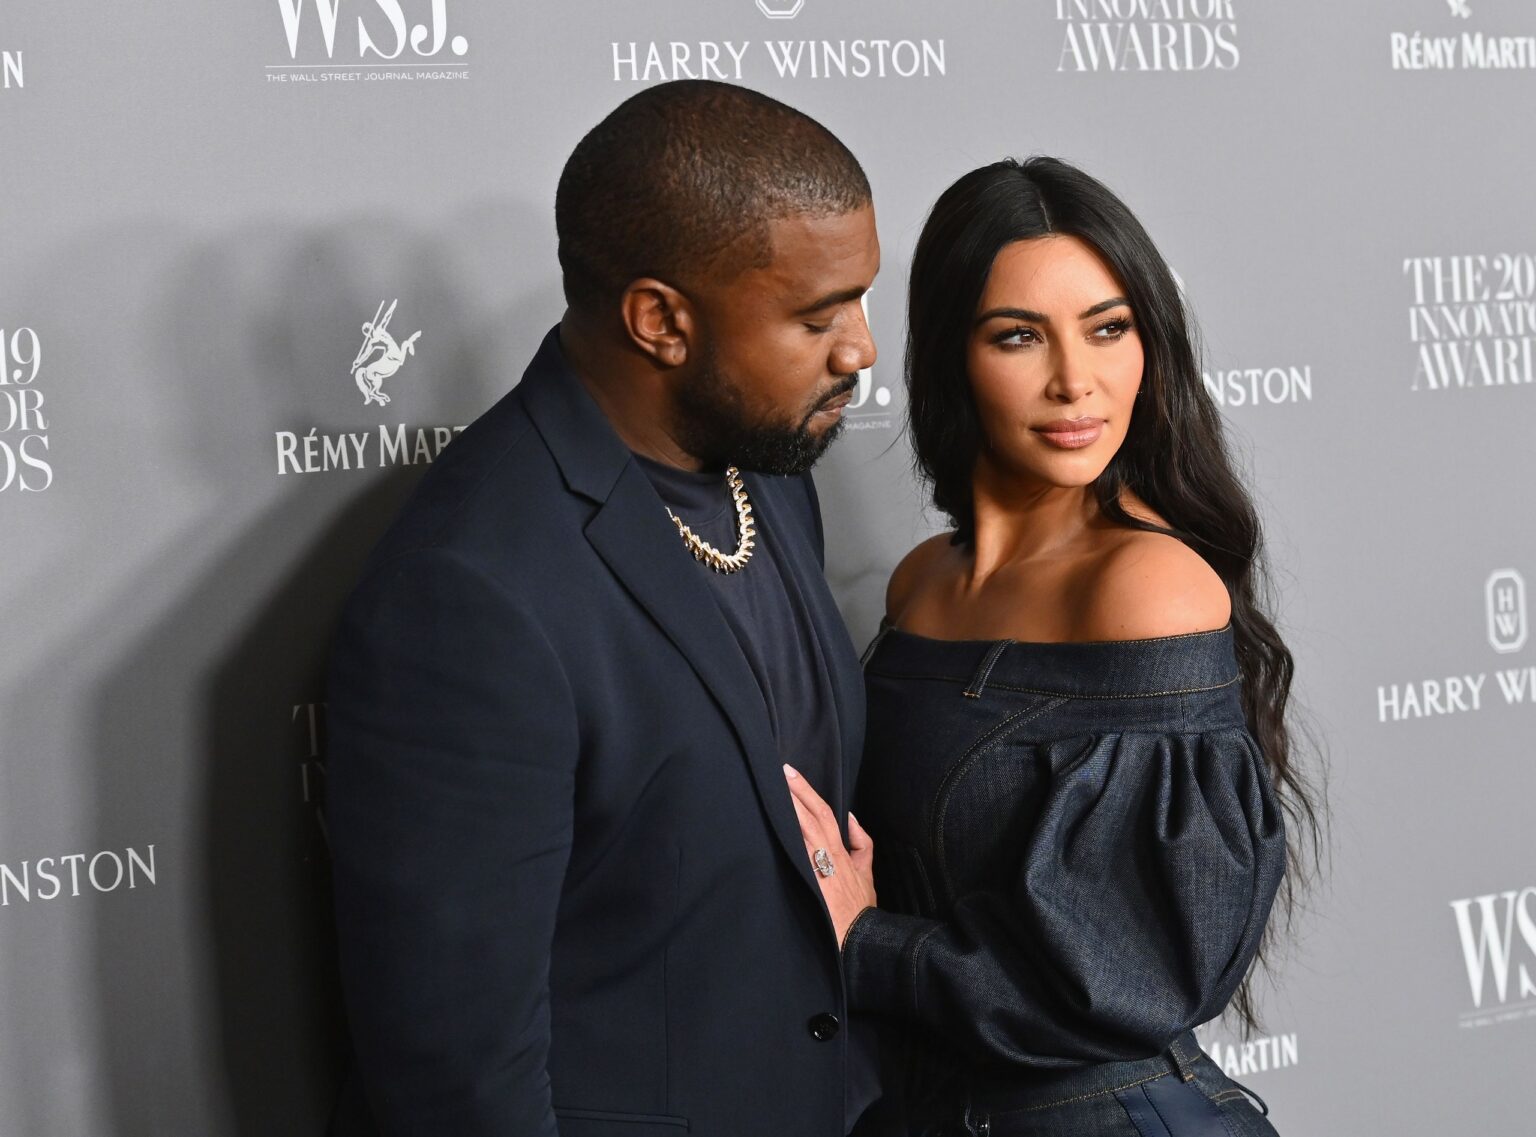 Could Kanye West be regretting the whole Kim Kardashian divorce saga? Why his most recent breakup leads us to believe so.